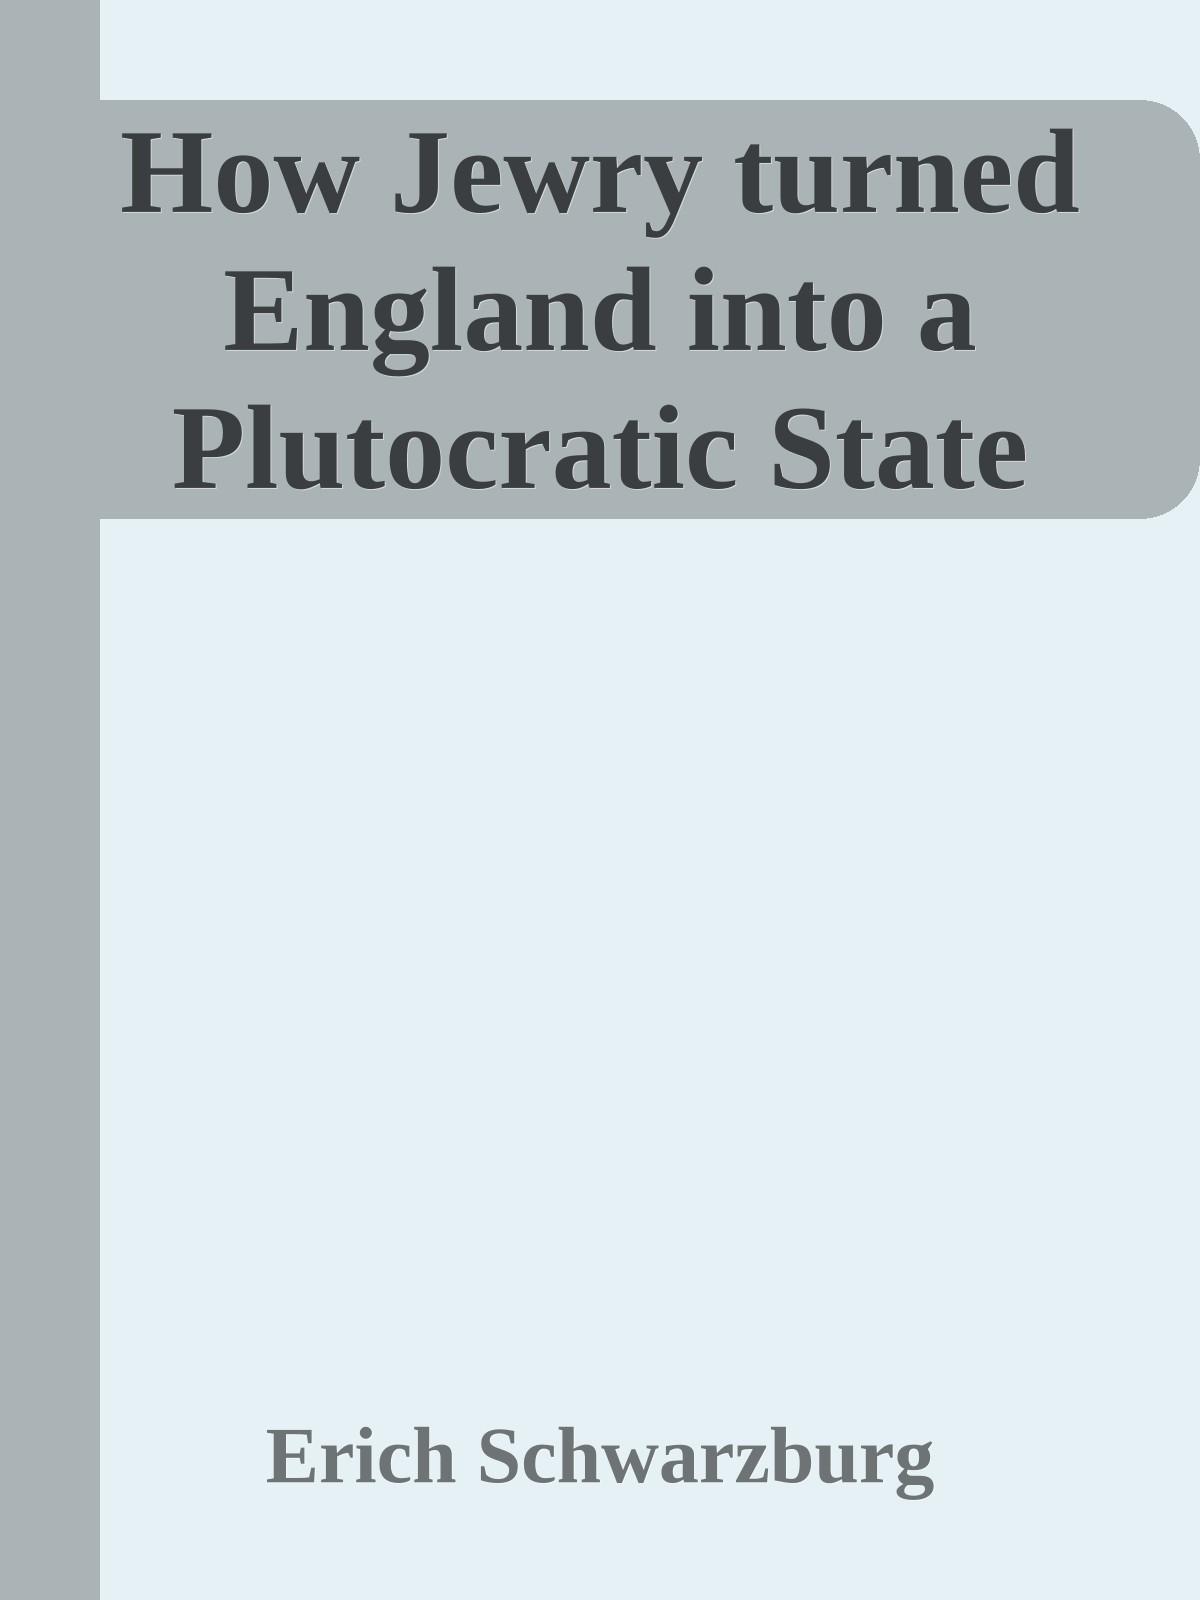 How Jewry turned England into a Plutocratic State (1940) by Erich Schwarzburg